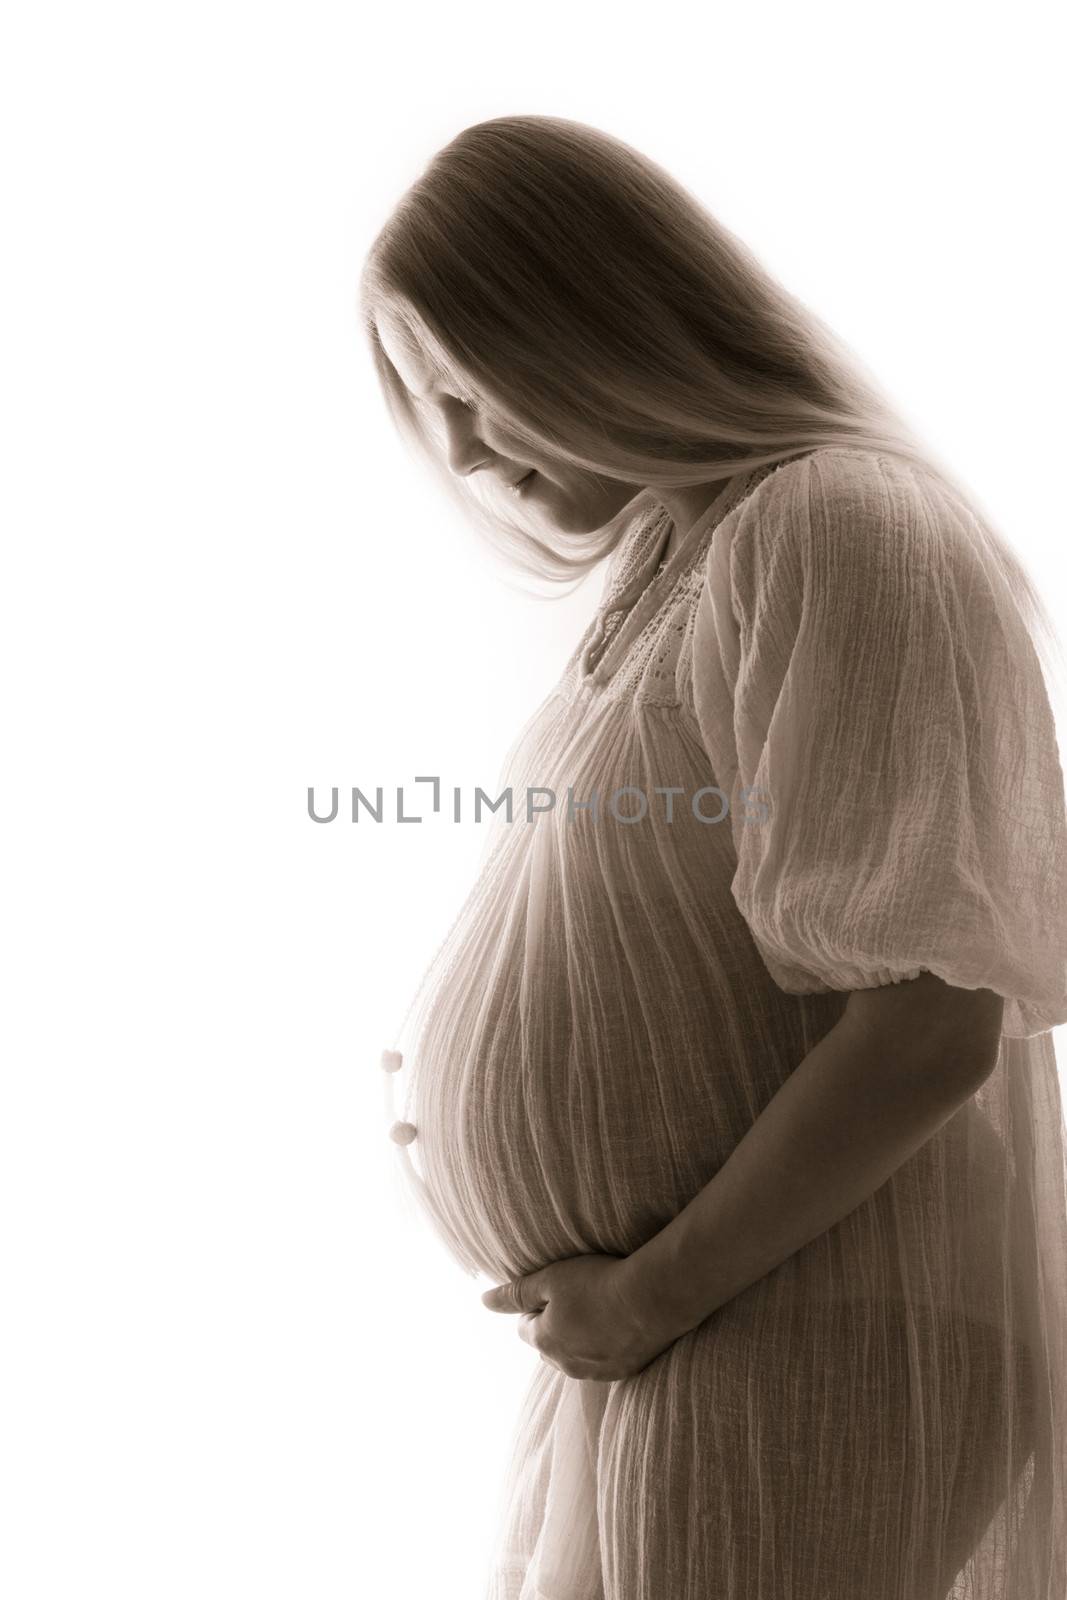 Blonde caucasian pregnant woman isolated on white